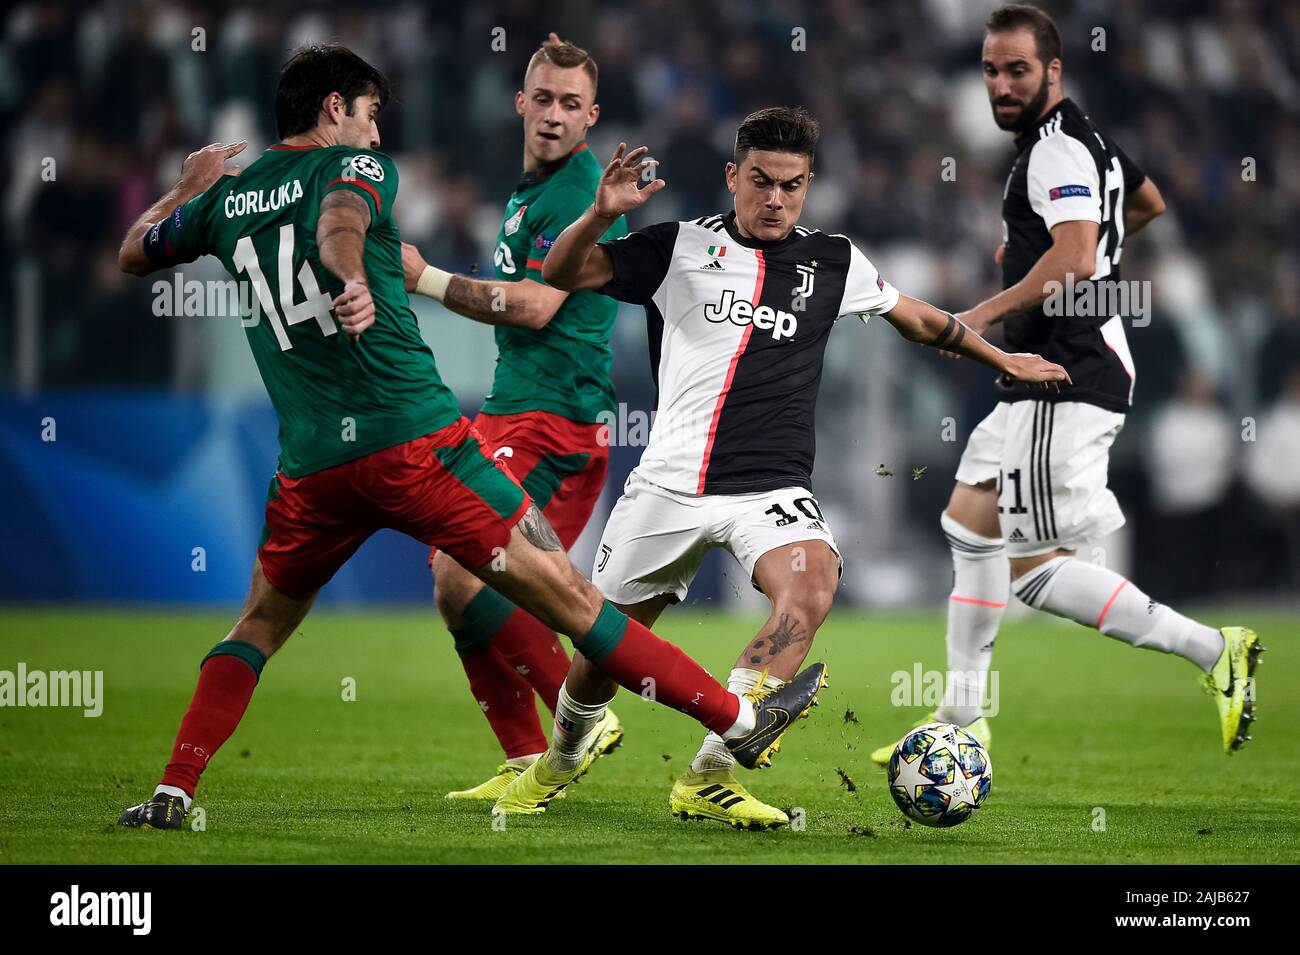 Turin, Italy - 22 October, 2019: Paulo Dybala (C) of Juventus FC competes for the ball with Vedran Corluka (L) of Lokomotiv Moscow during the UEFA Champions League football match between Juventus FC and FC Lokomotiv Moscow. Juventus FC won 2-1 over FC Lokomotiv Moscow. Credit: Nicolò Campo/Alamy Live News Stock Photo